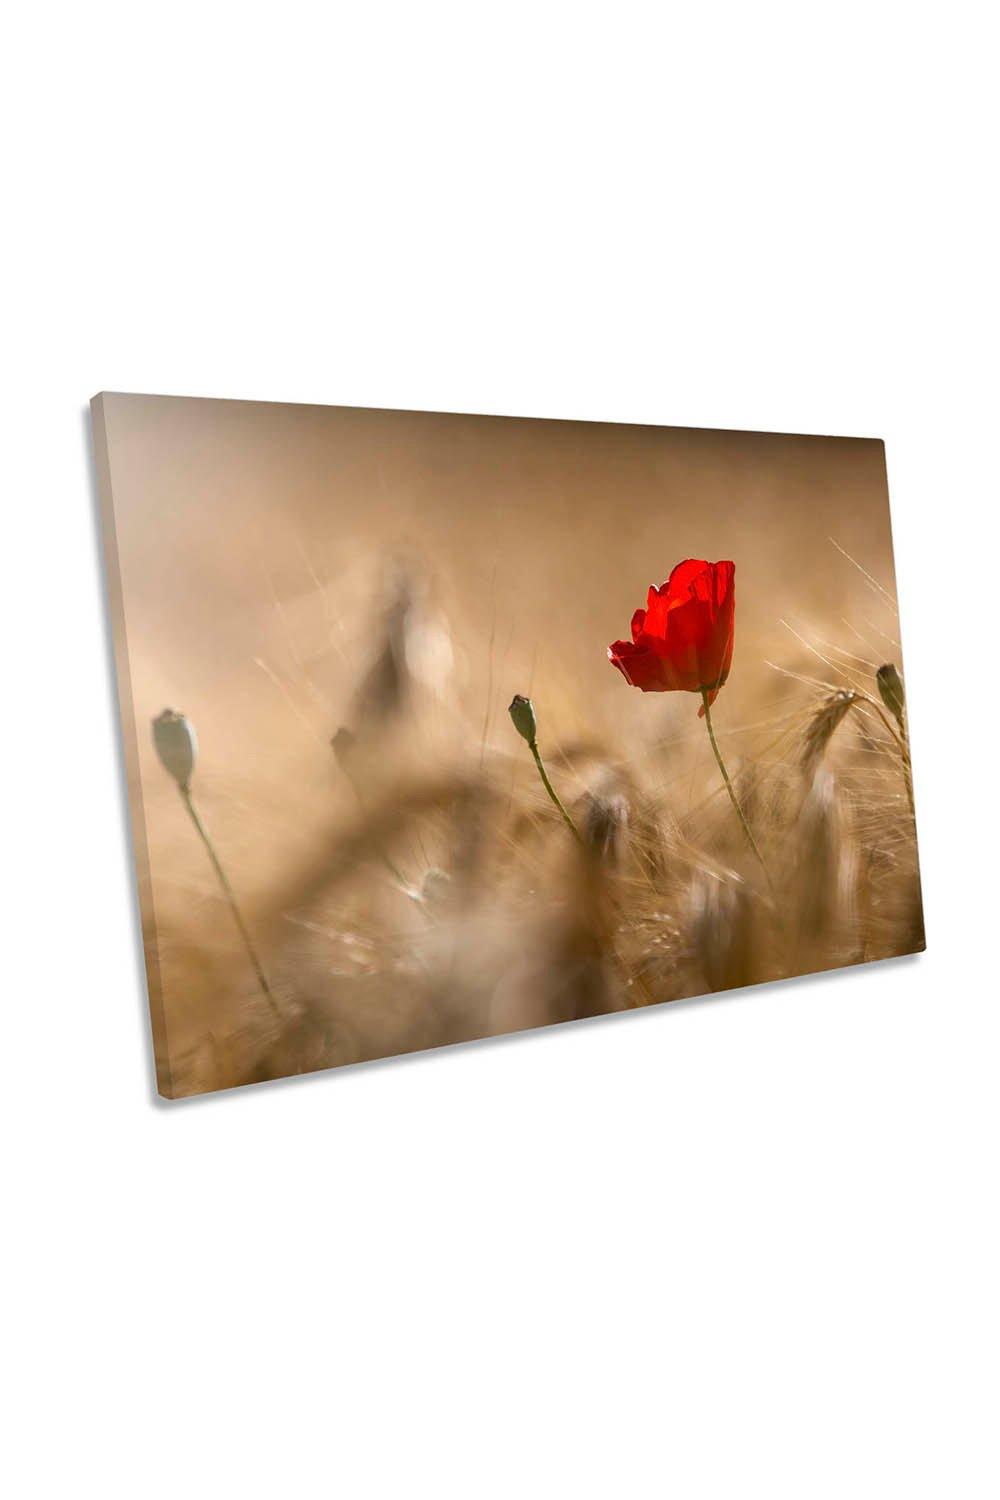 Red Scenic Poppy Flower Canvas Wall Art Picture Print